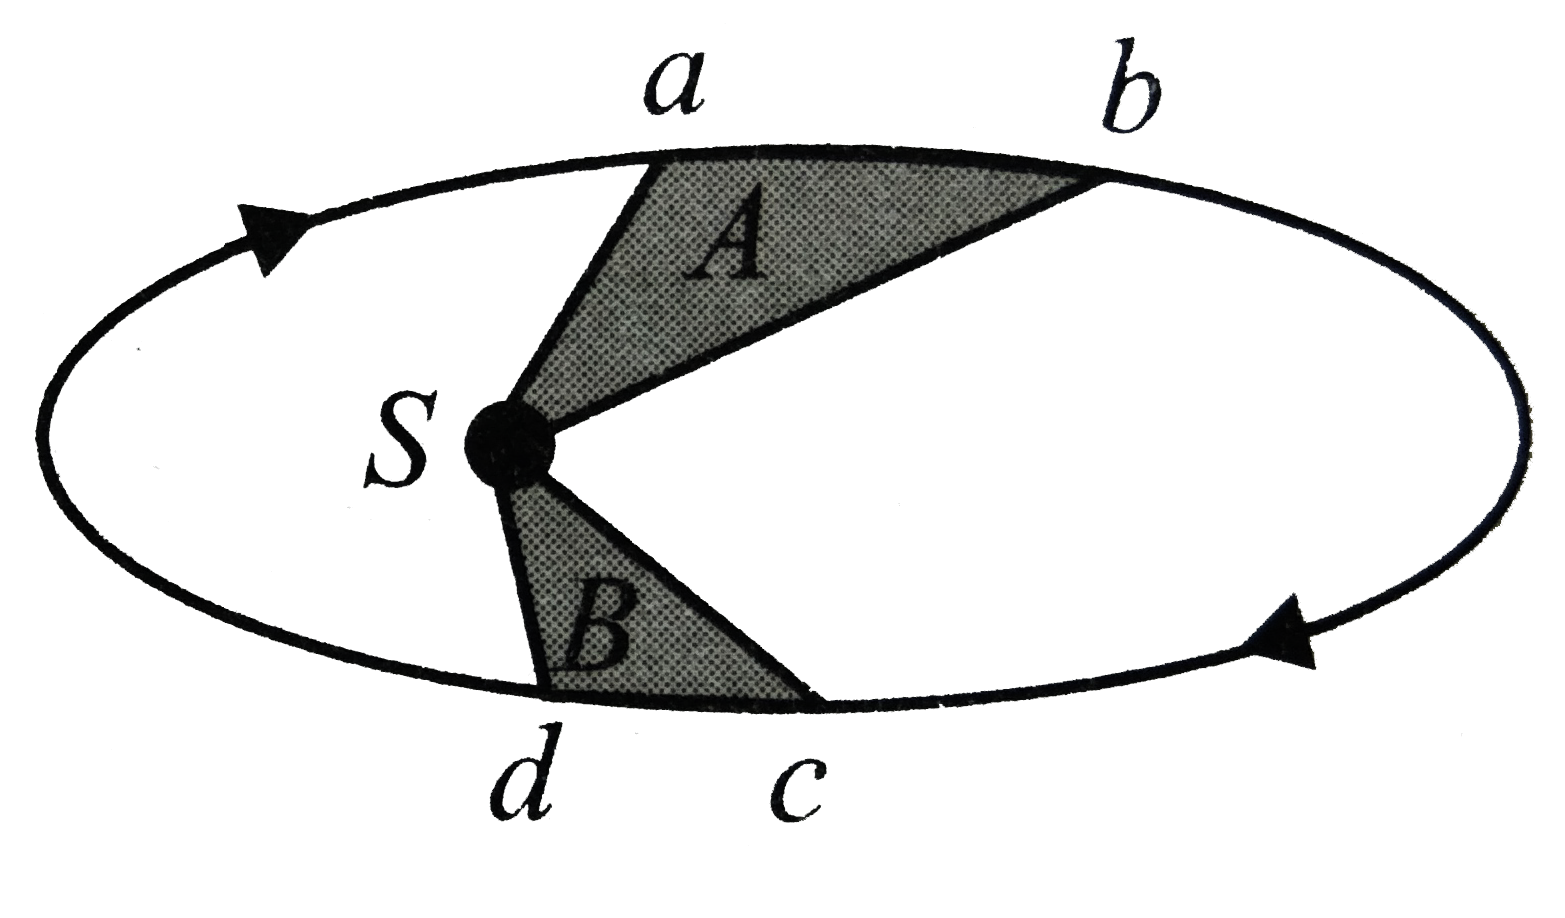 Figure shows the motion of a planet around the Sun S in an elliptical orbit with the Sun at the focus. The shaded areas A and B are also shown in the figure which can be assumed to be equal. If t(1) and t(2) represent the time taken for the planet to move from a to b and c to d, respectively then